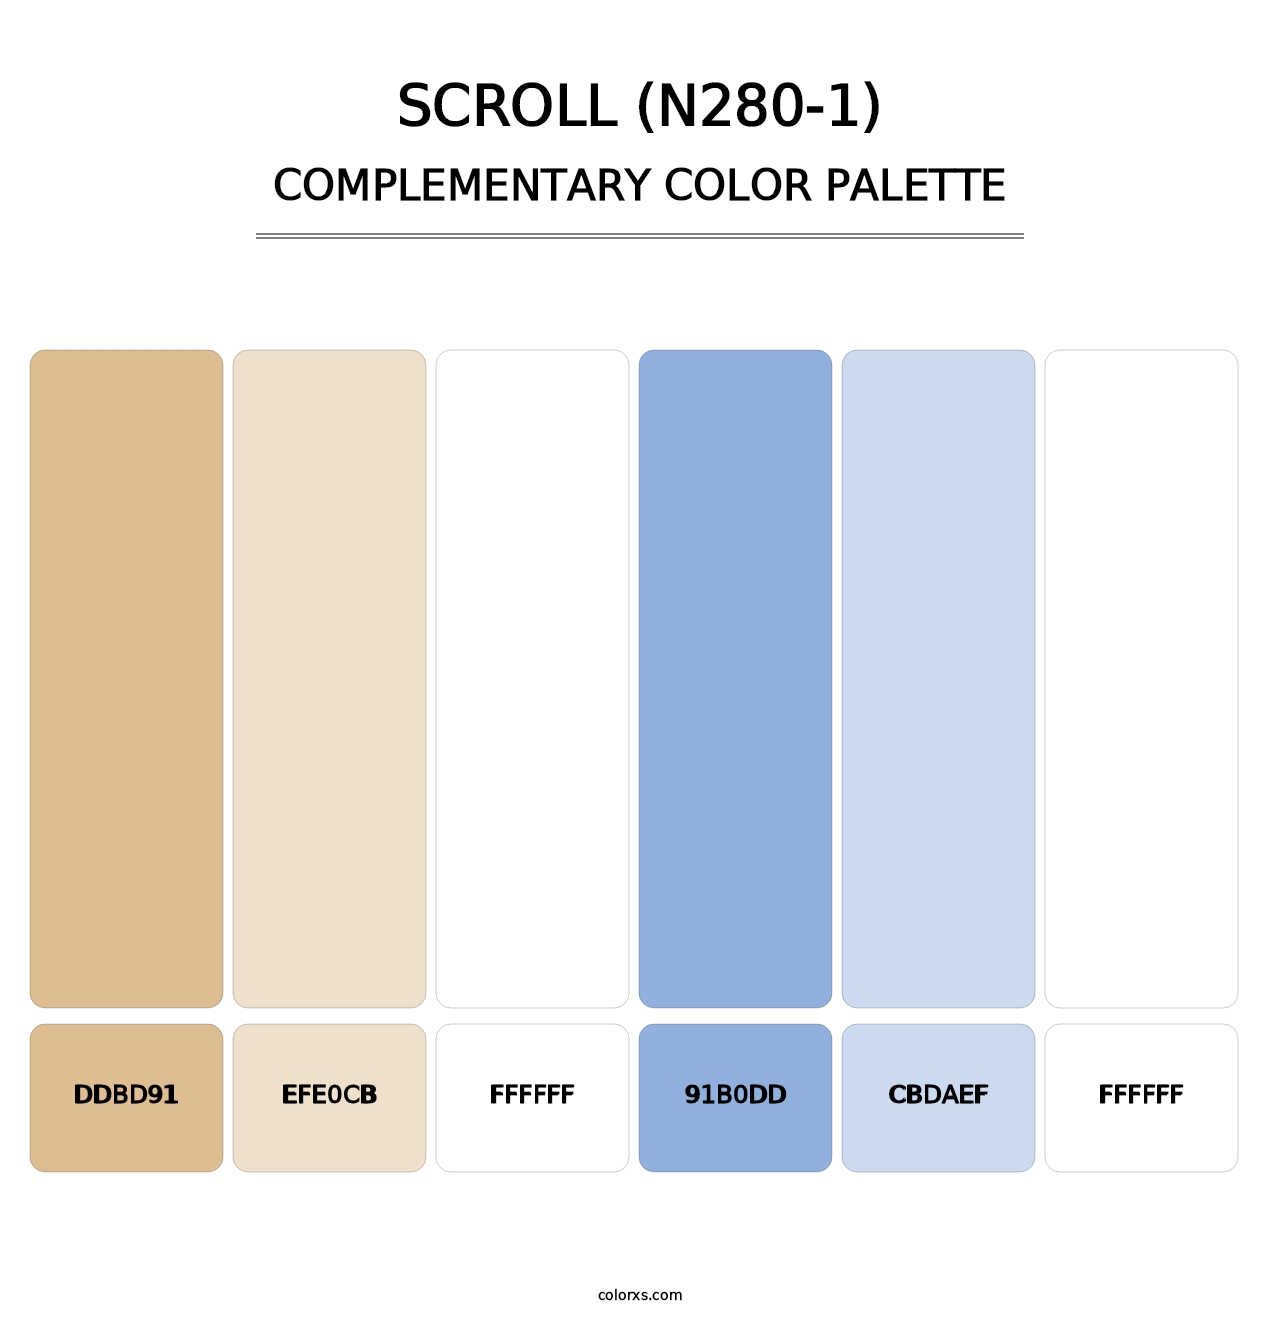 Scroll (N280-1) - Complementary Color Palette